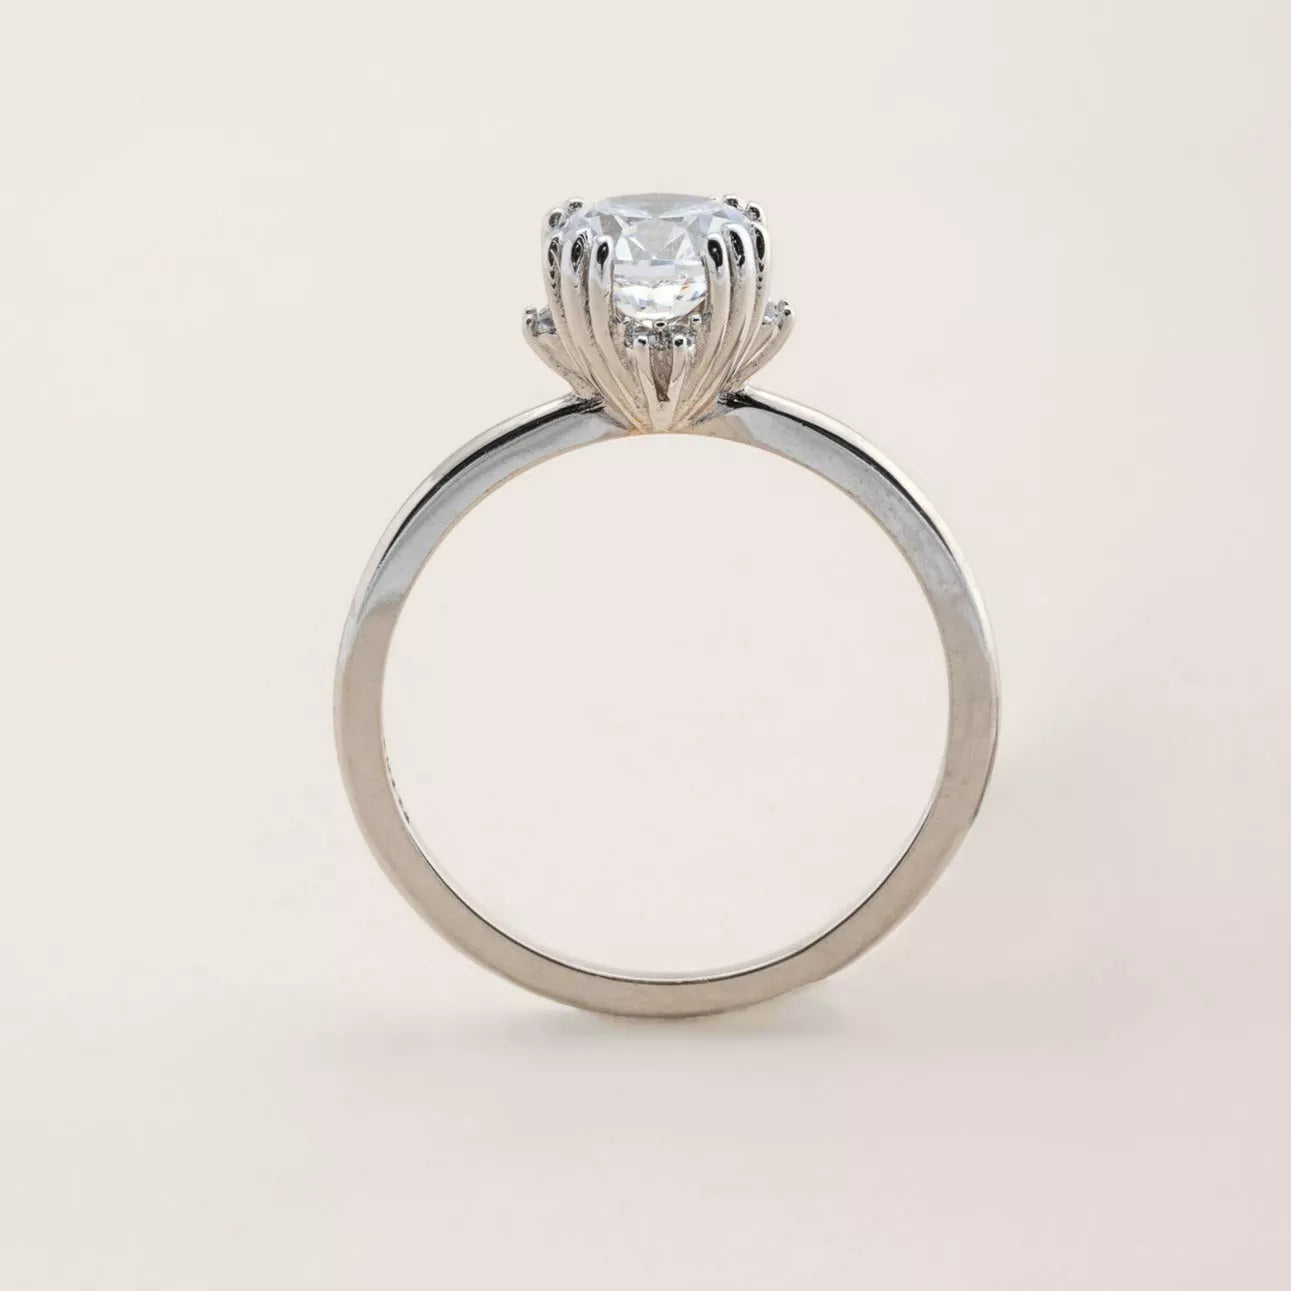 The Fantasy Lab-created Simple Diamond Engagement Ring